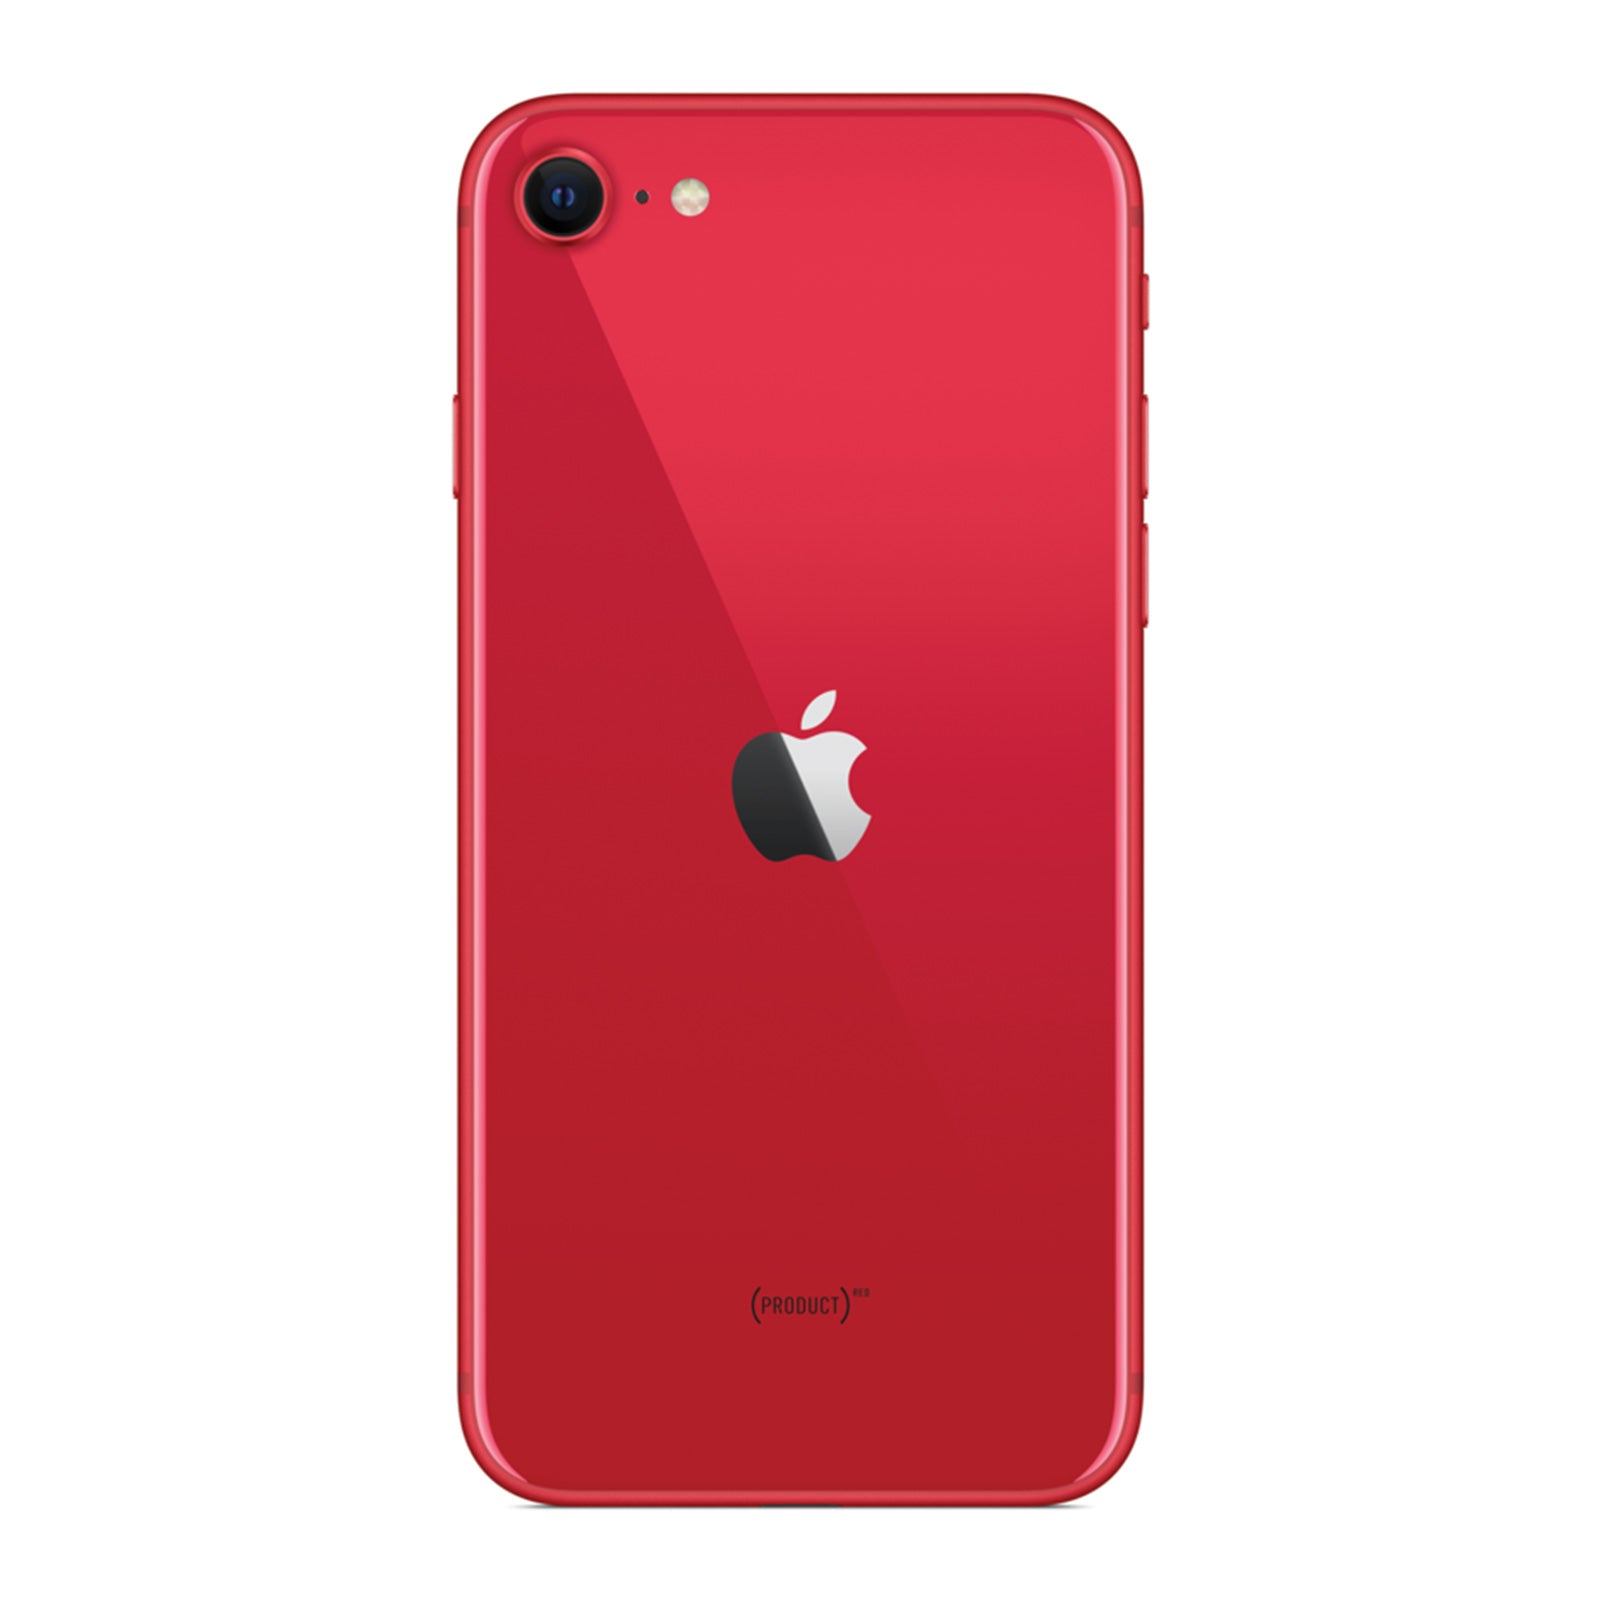 Apple iPhone SE 2nd Gen 256GB Product Red Very Good T-Mobile